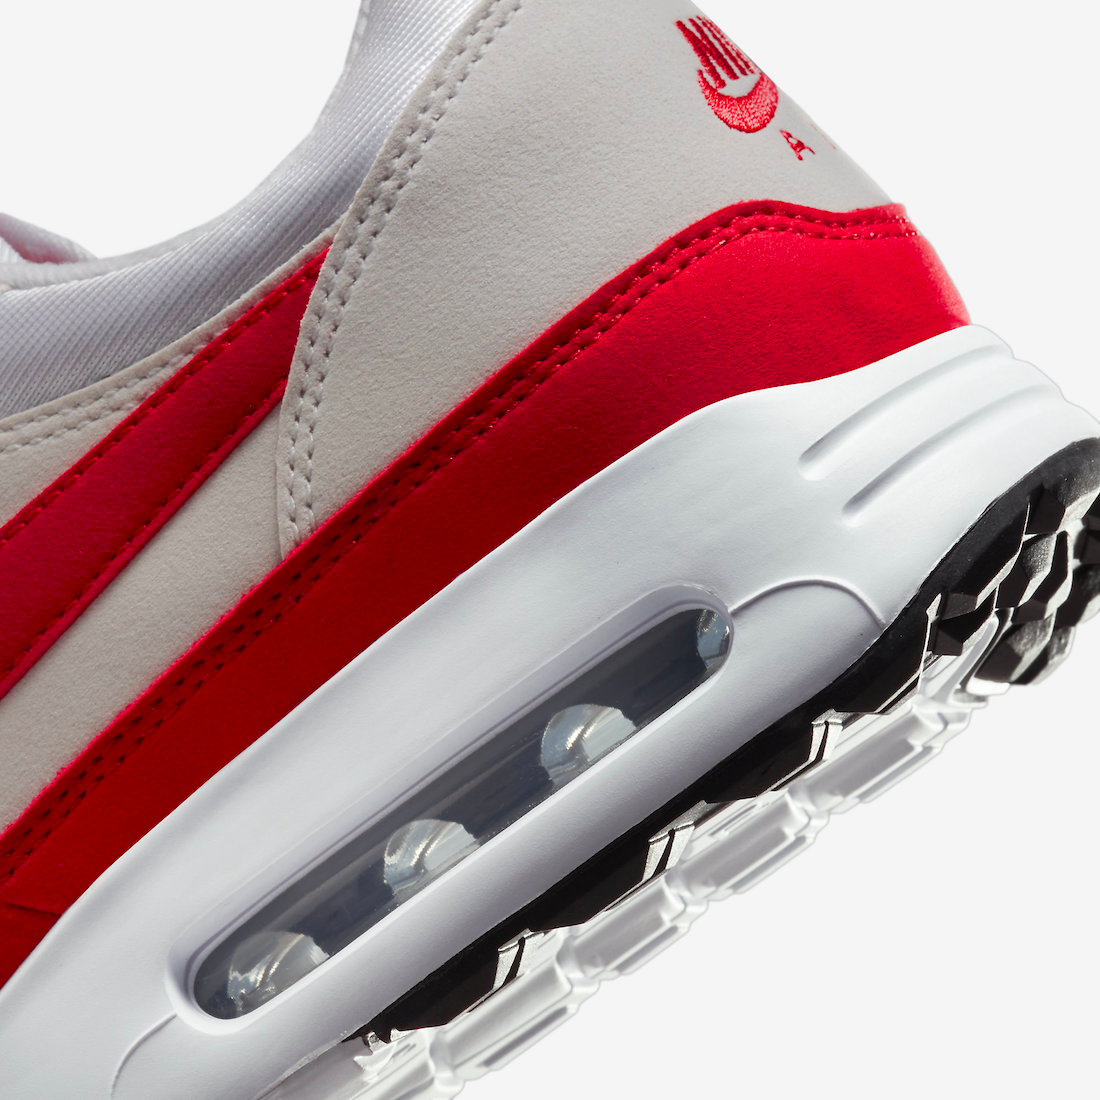 The Big Bubble Nike Air Max 1 Gets a Golf Edition - Sneaker Freaker